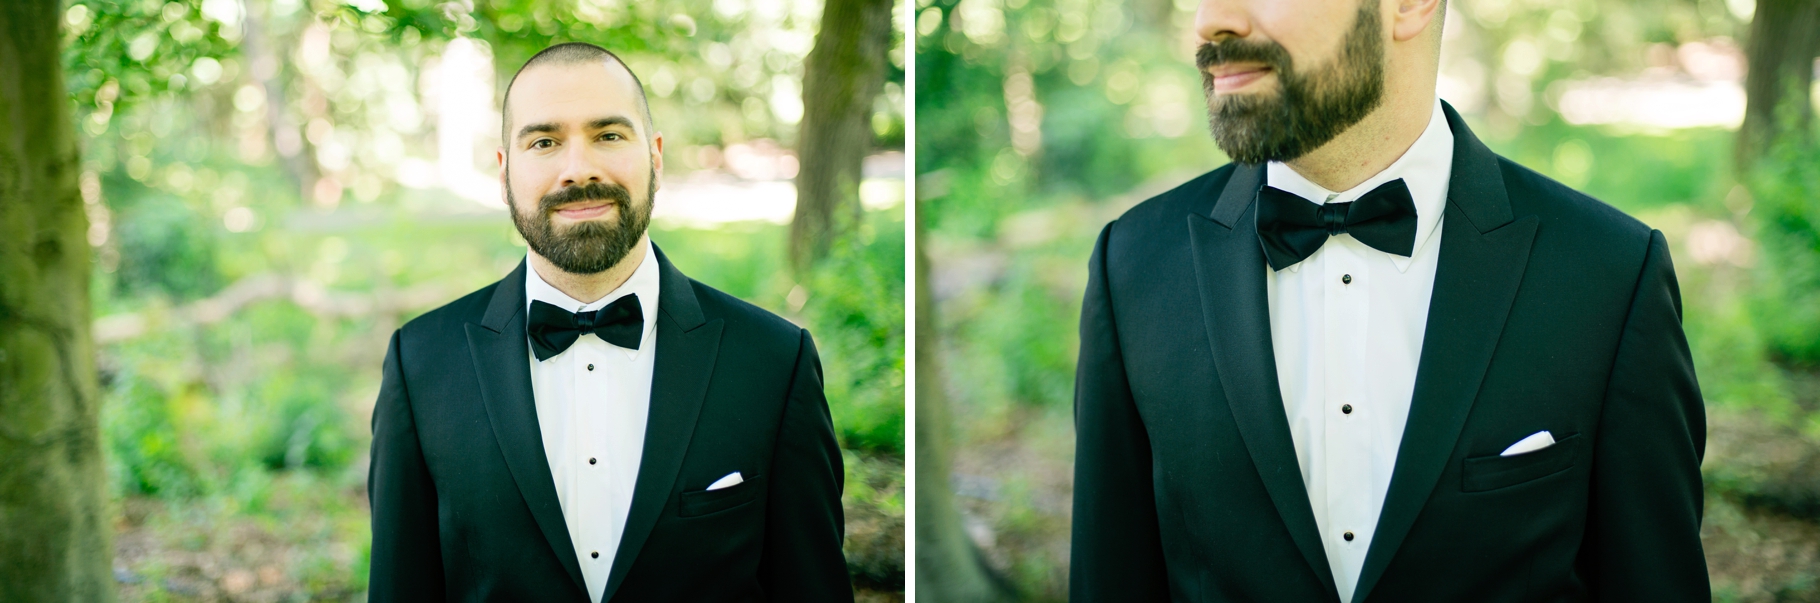 21-Groom-Portraits-Classic-Groom-Style-Bow-Tie-Black-Suit-Woodland-Park-Seattle-Wedding-Photographer-Photography-by-Betty-Elaine